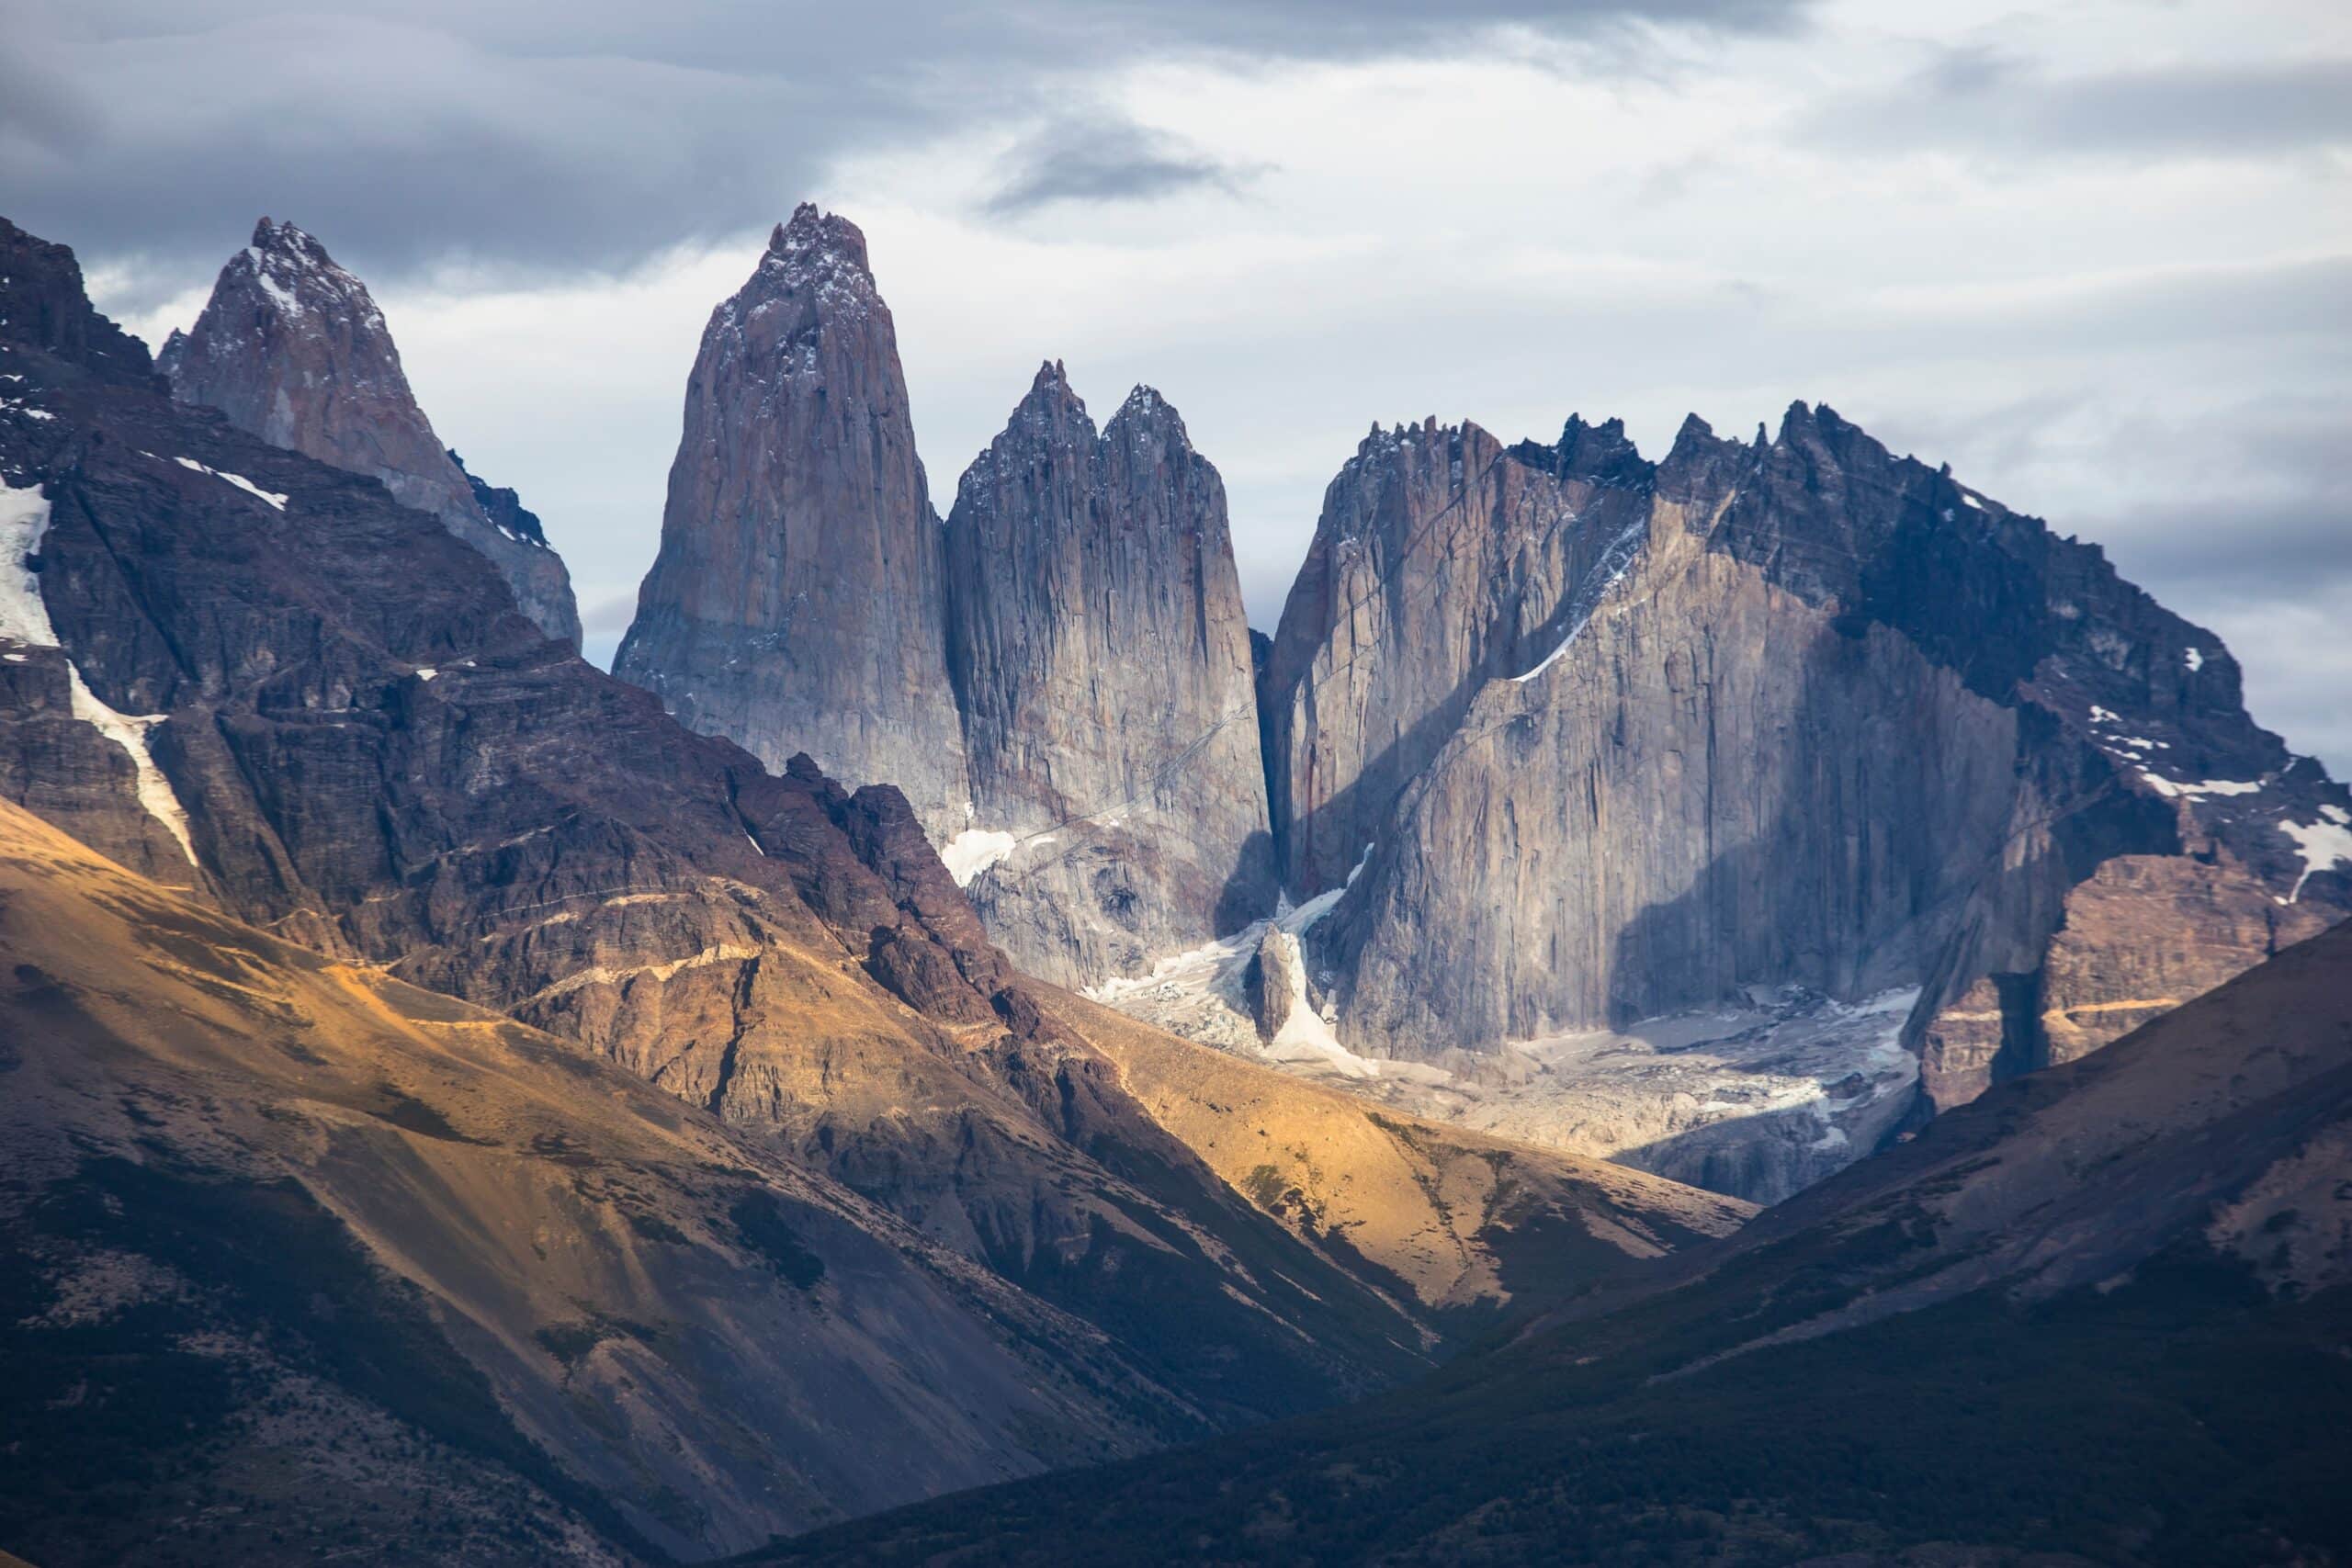 <p><span>Patagonia, a region shared by Argentina and Chile, is a rugged wilderness area known for its towering mountains, blue glaciers, and unique wildlife. Highlights include Torres del Paine National Park in Chile and Perito Moreno Glacier in Argentina. </span></p> <p><b>Insider’s Tip: </b><span>Consider a multi-day trek in Torres del Paine for a comprehensive experience of Patagonia’s natural beauty. </span></p> <p><b>How to Get There: </b><span>Fly to Punta Arenas in Chile or El Calafate in Argentina, followed by bus or car to specific destinations within Patagonia. </span></p> <p><b>When to Travel: </b><span>The Southern Hemisphere’s summer (December to February) offers the best conditions for exploration.</span></p>